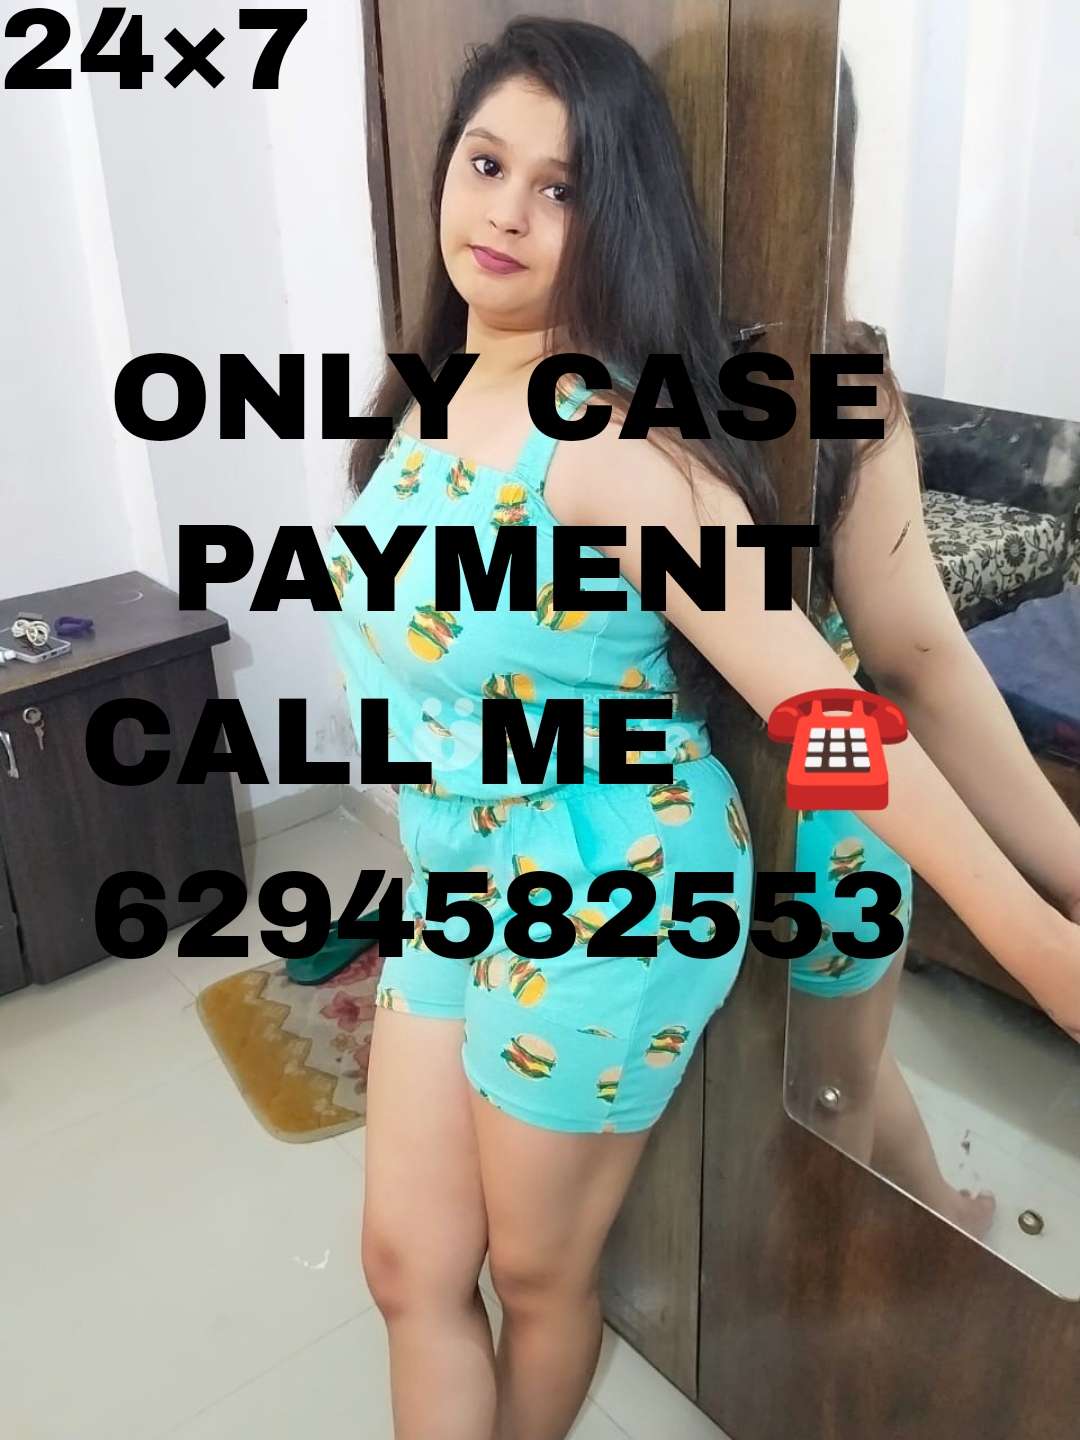 DILSUKHNAGAR SERVICE PROVIDE ONLY CASE PAYMENT 